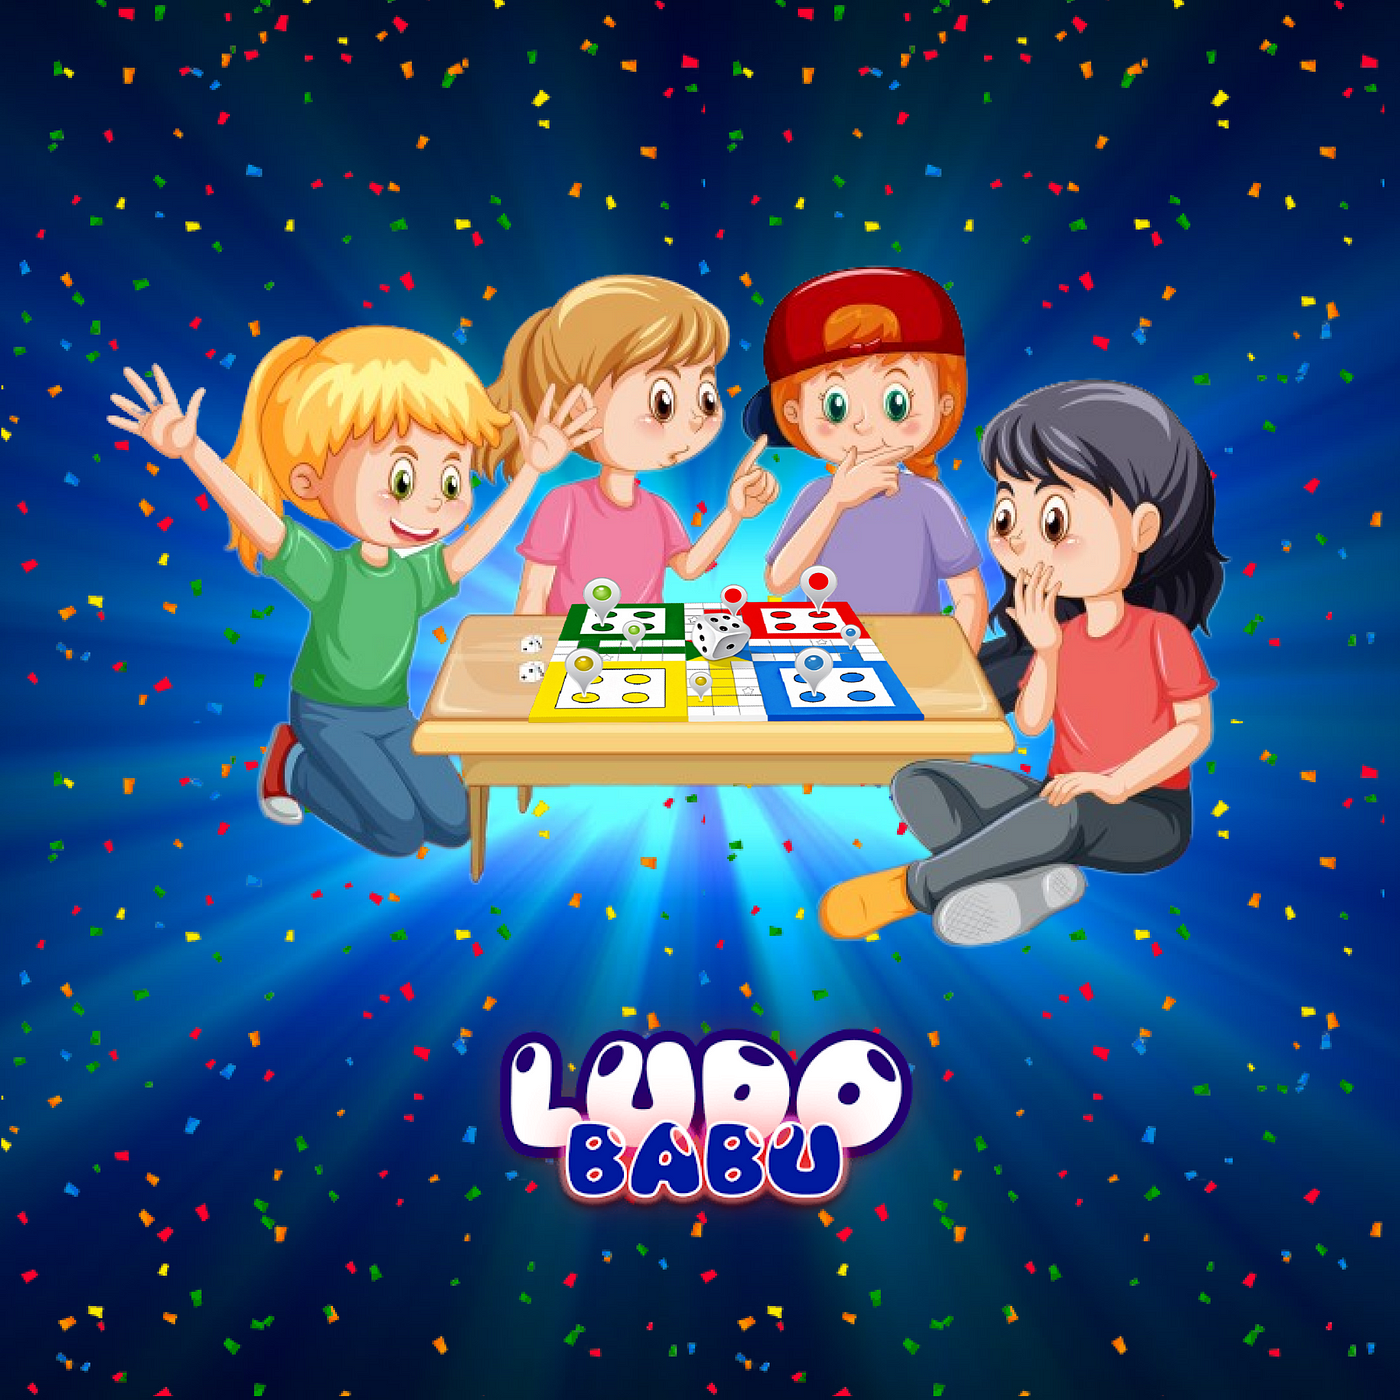 7 Reasons Why You Should Play Ludo Game With Your Kids